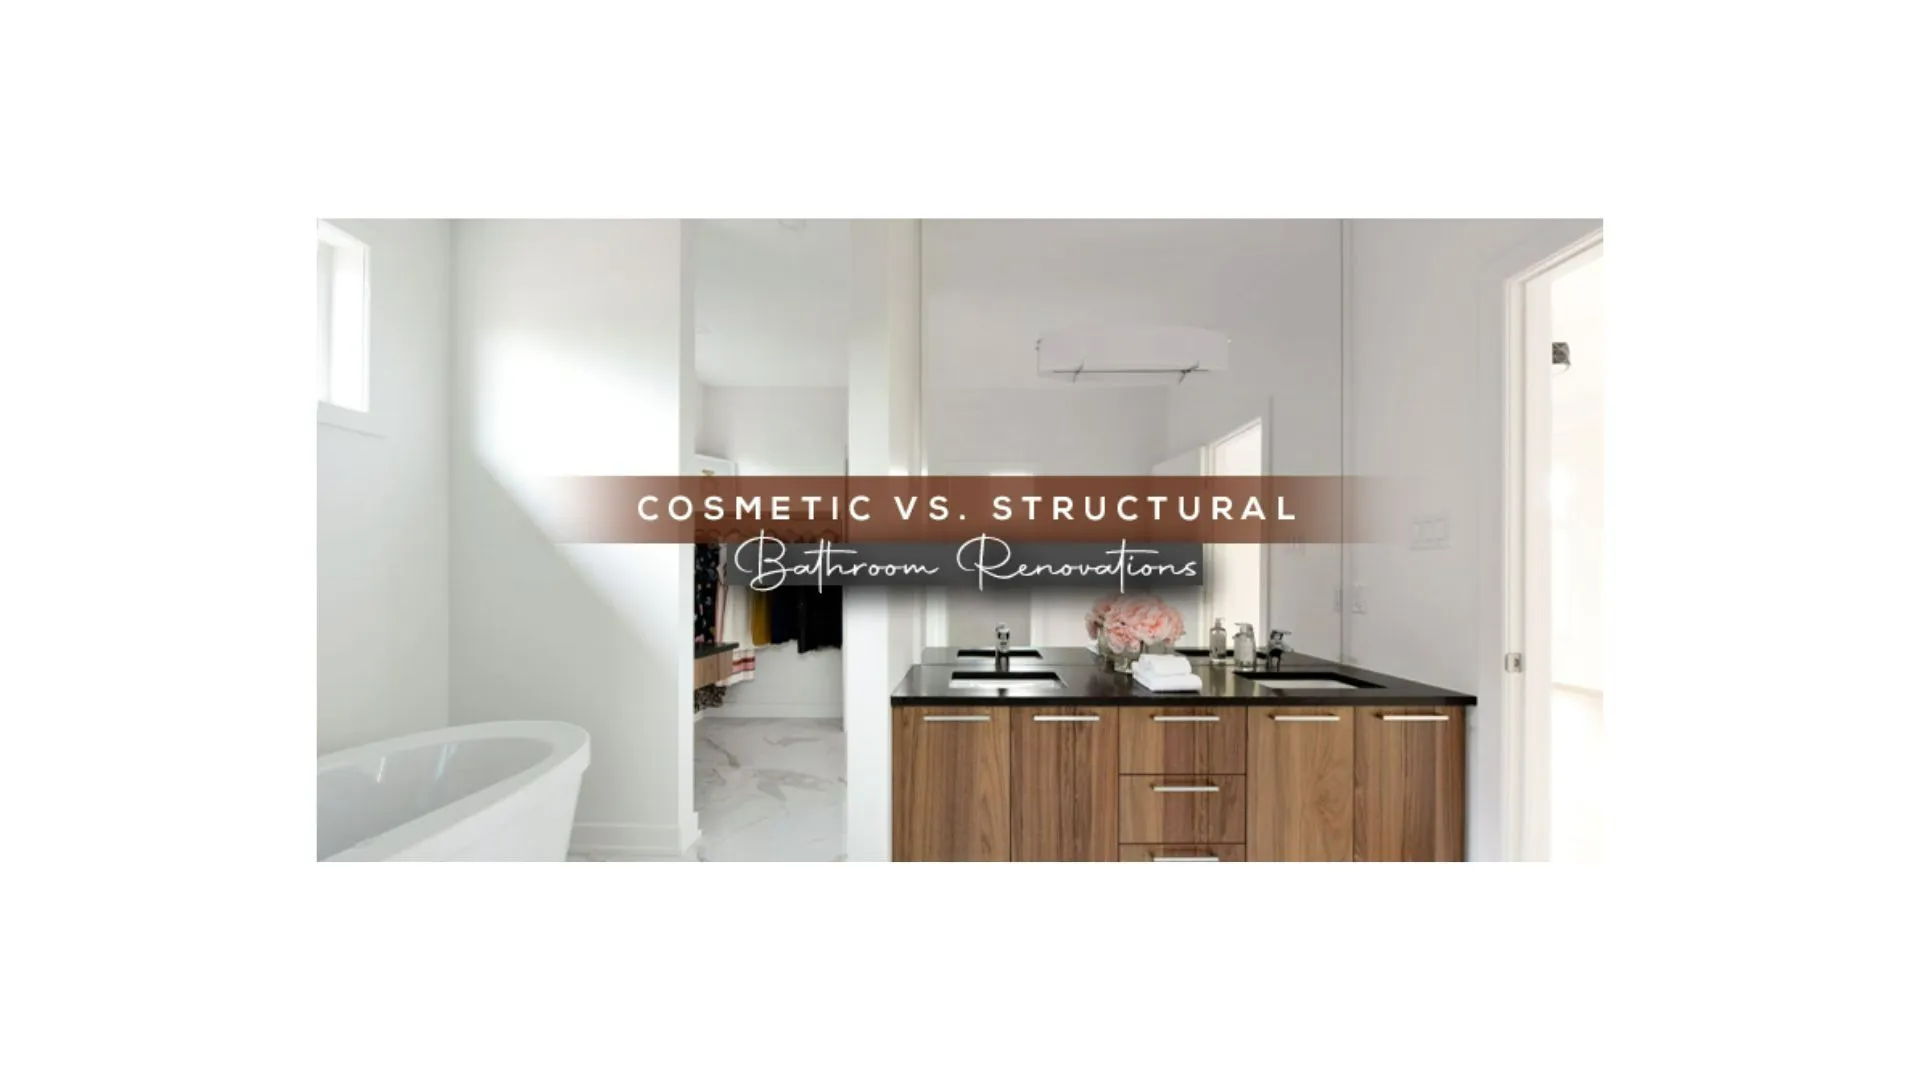 Cosmetic vs. Structural Bathroom Renovations Featued Images